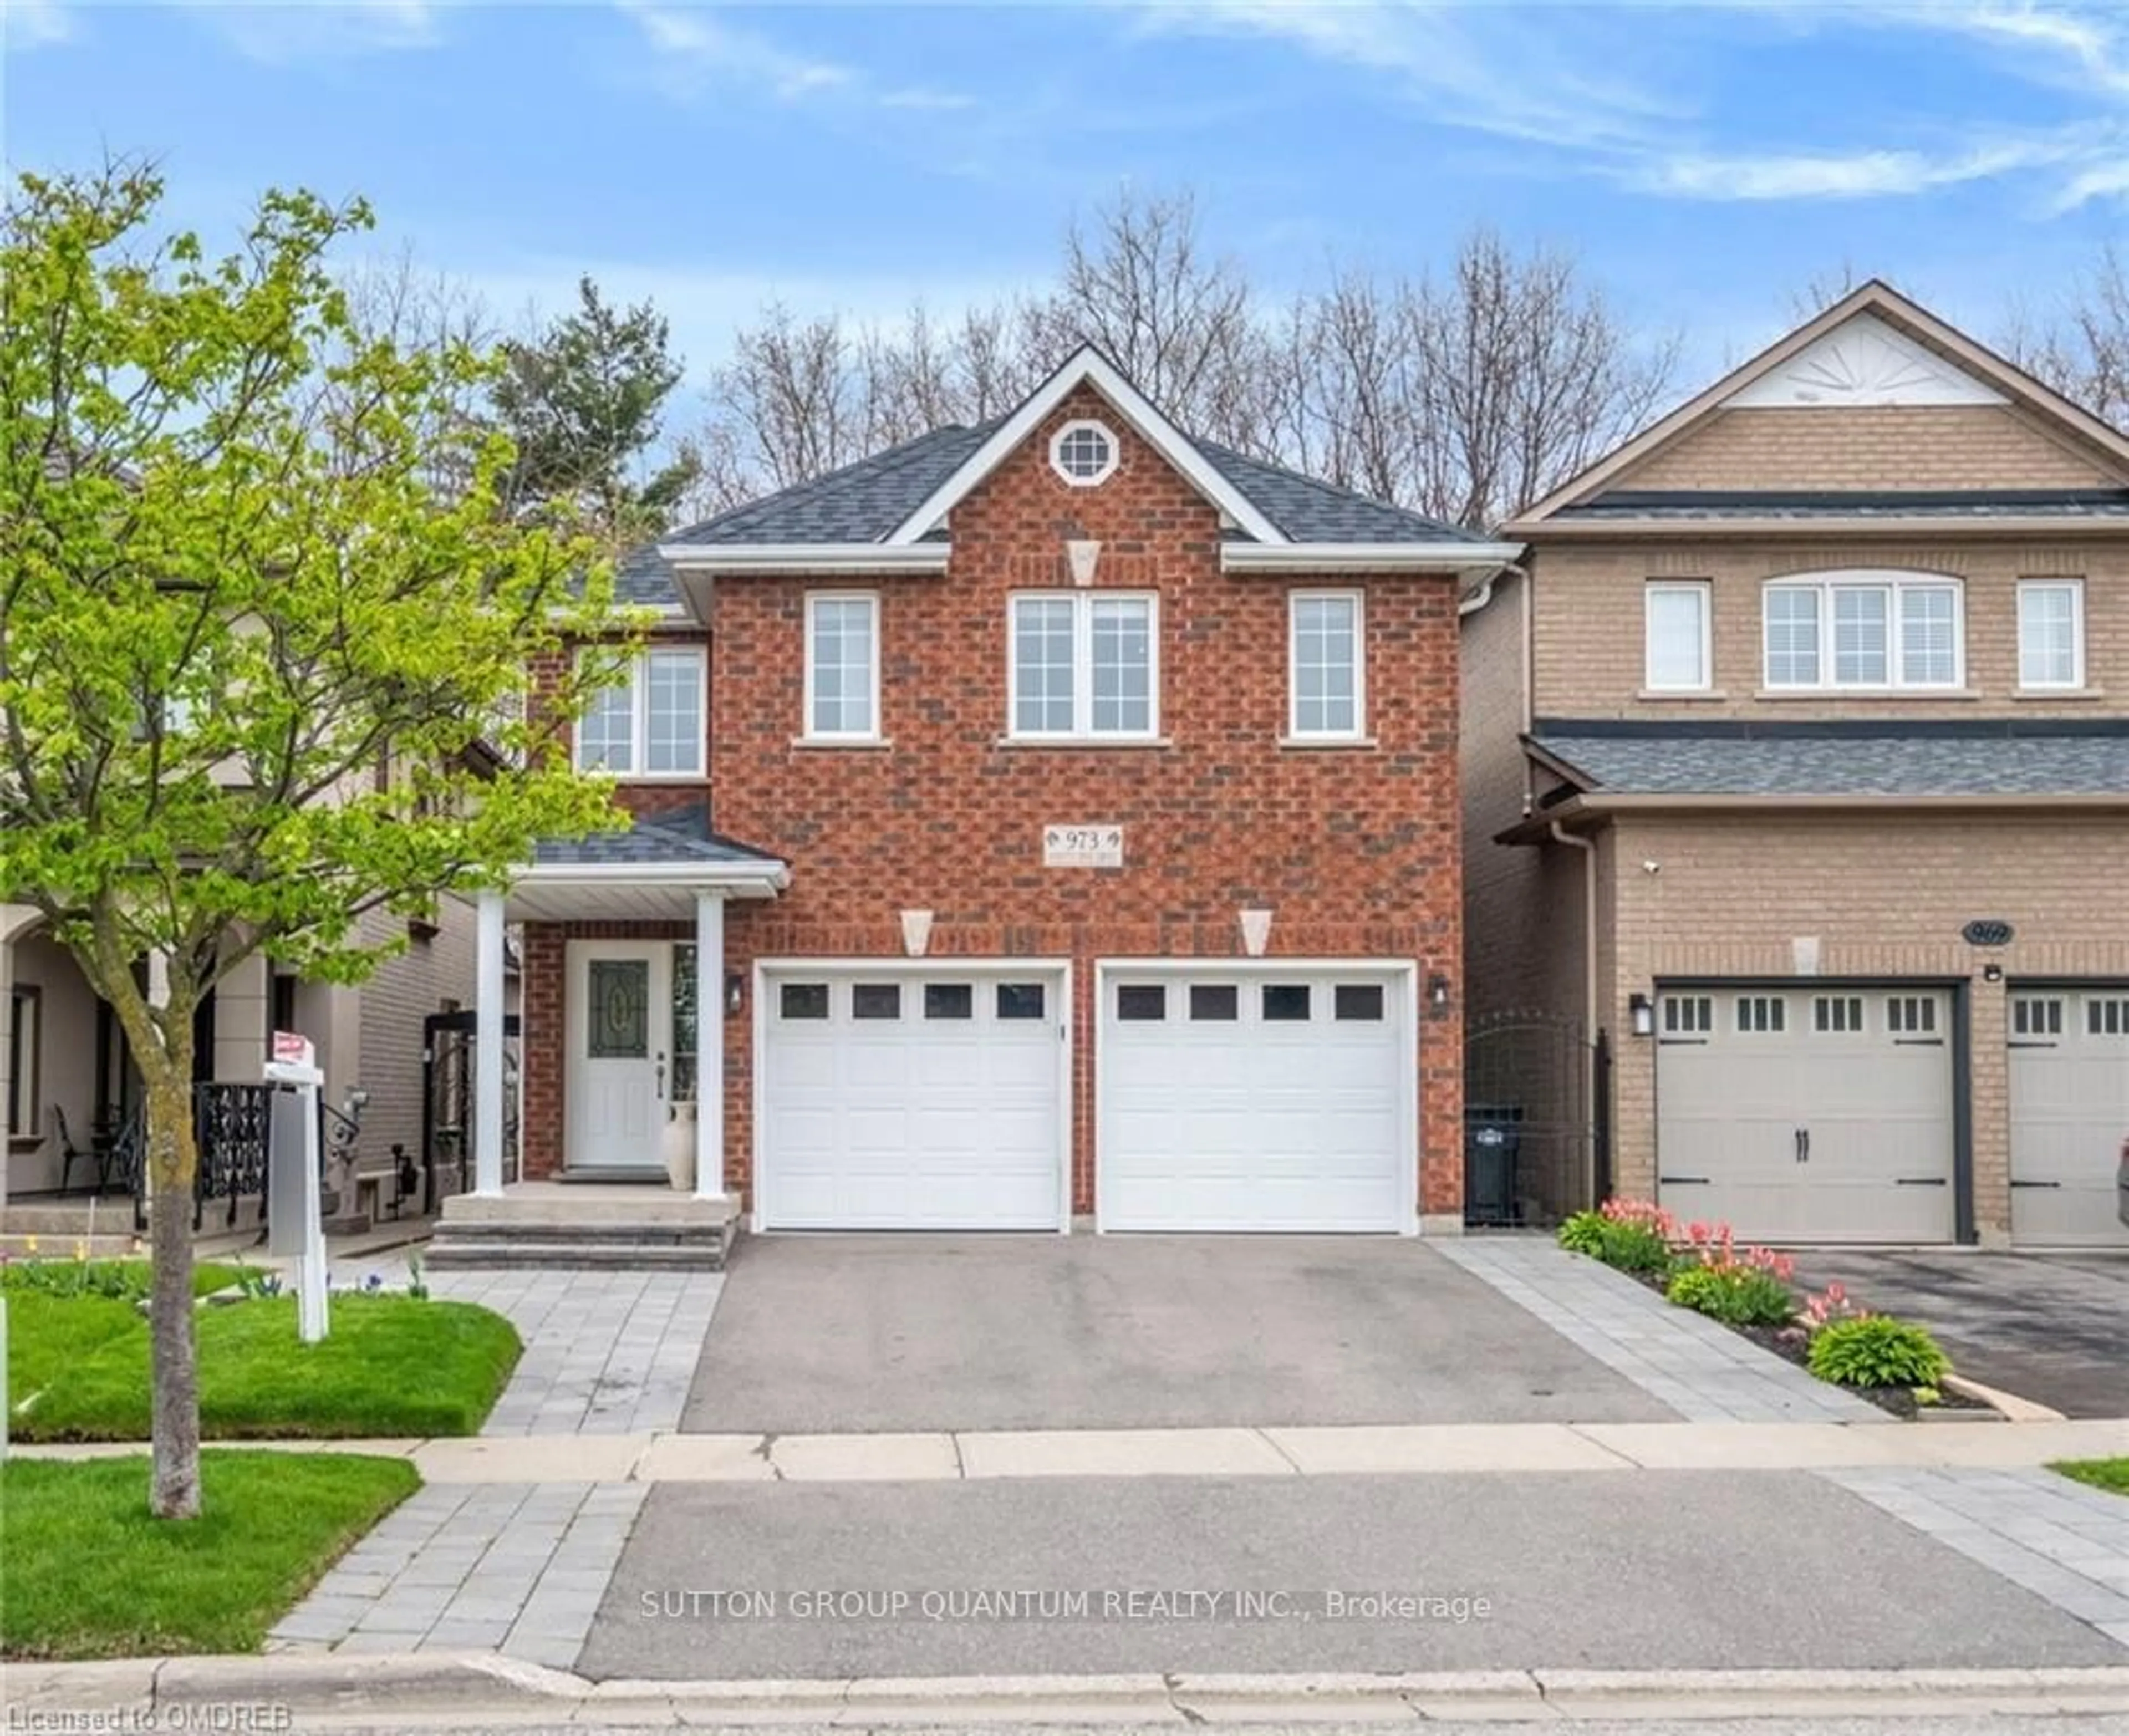 Home with brick exterior material for 973 Knotty Pine Grve, Mississauga Ontario L5W 1J9